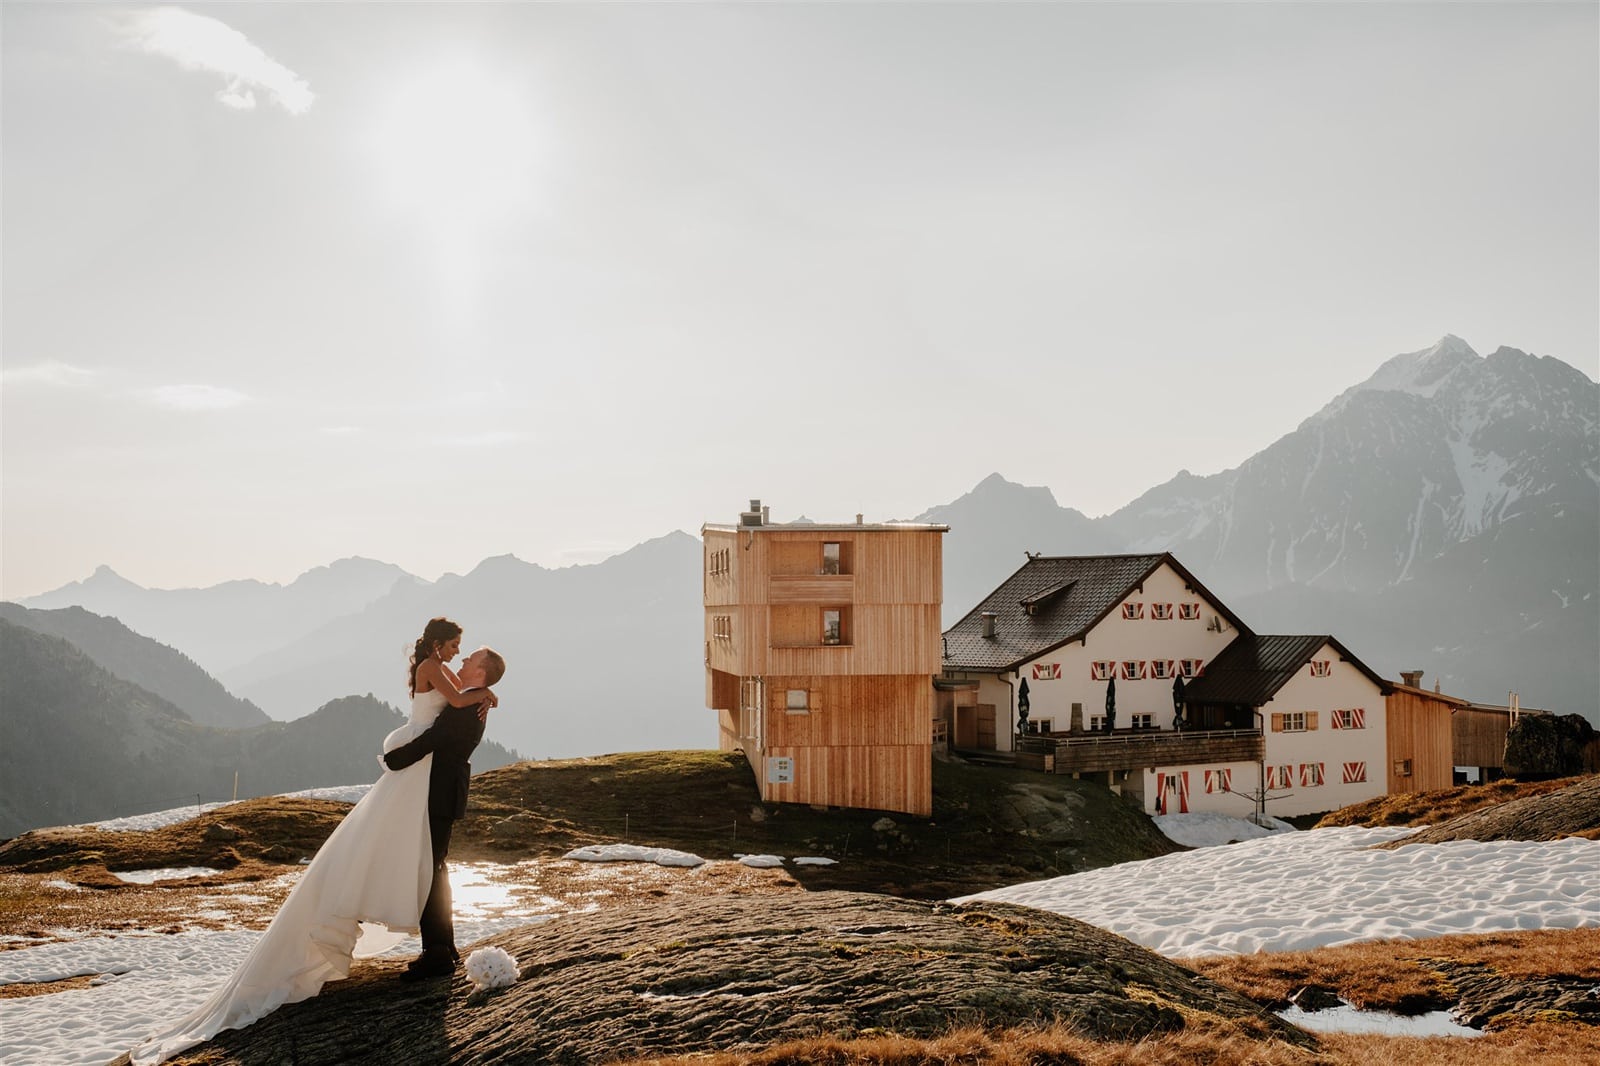 Mountain Hut Elopements in the Alps – Everything You Need To Know